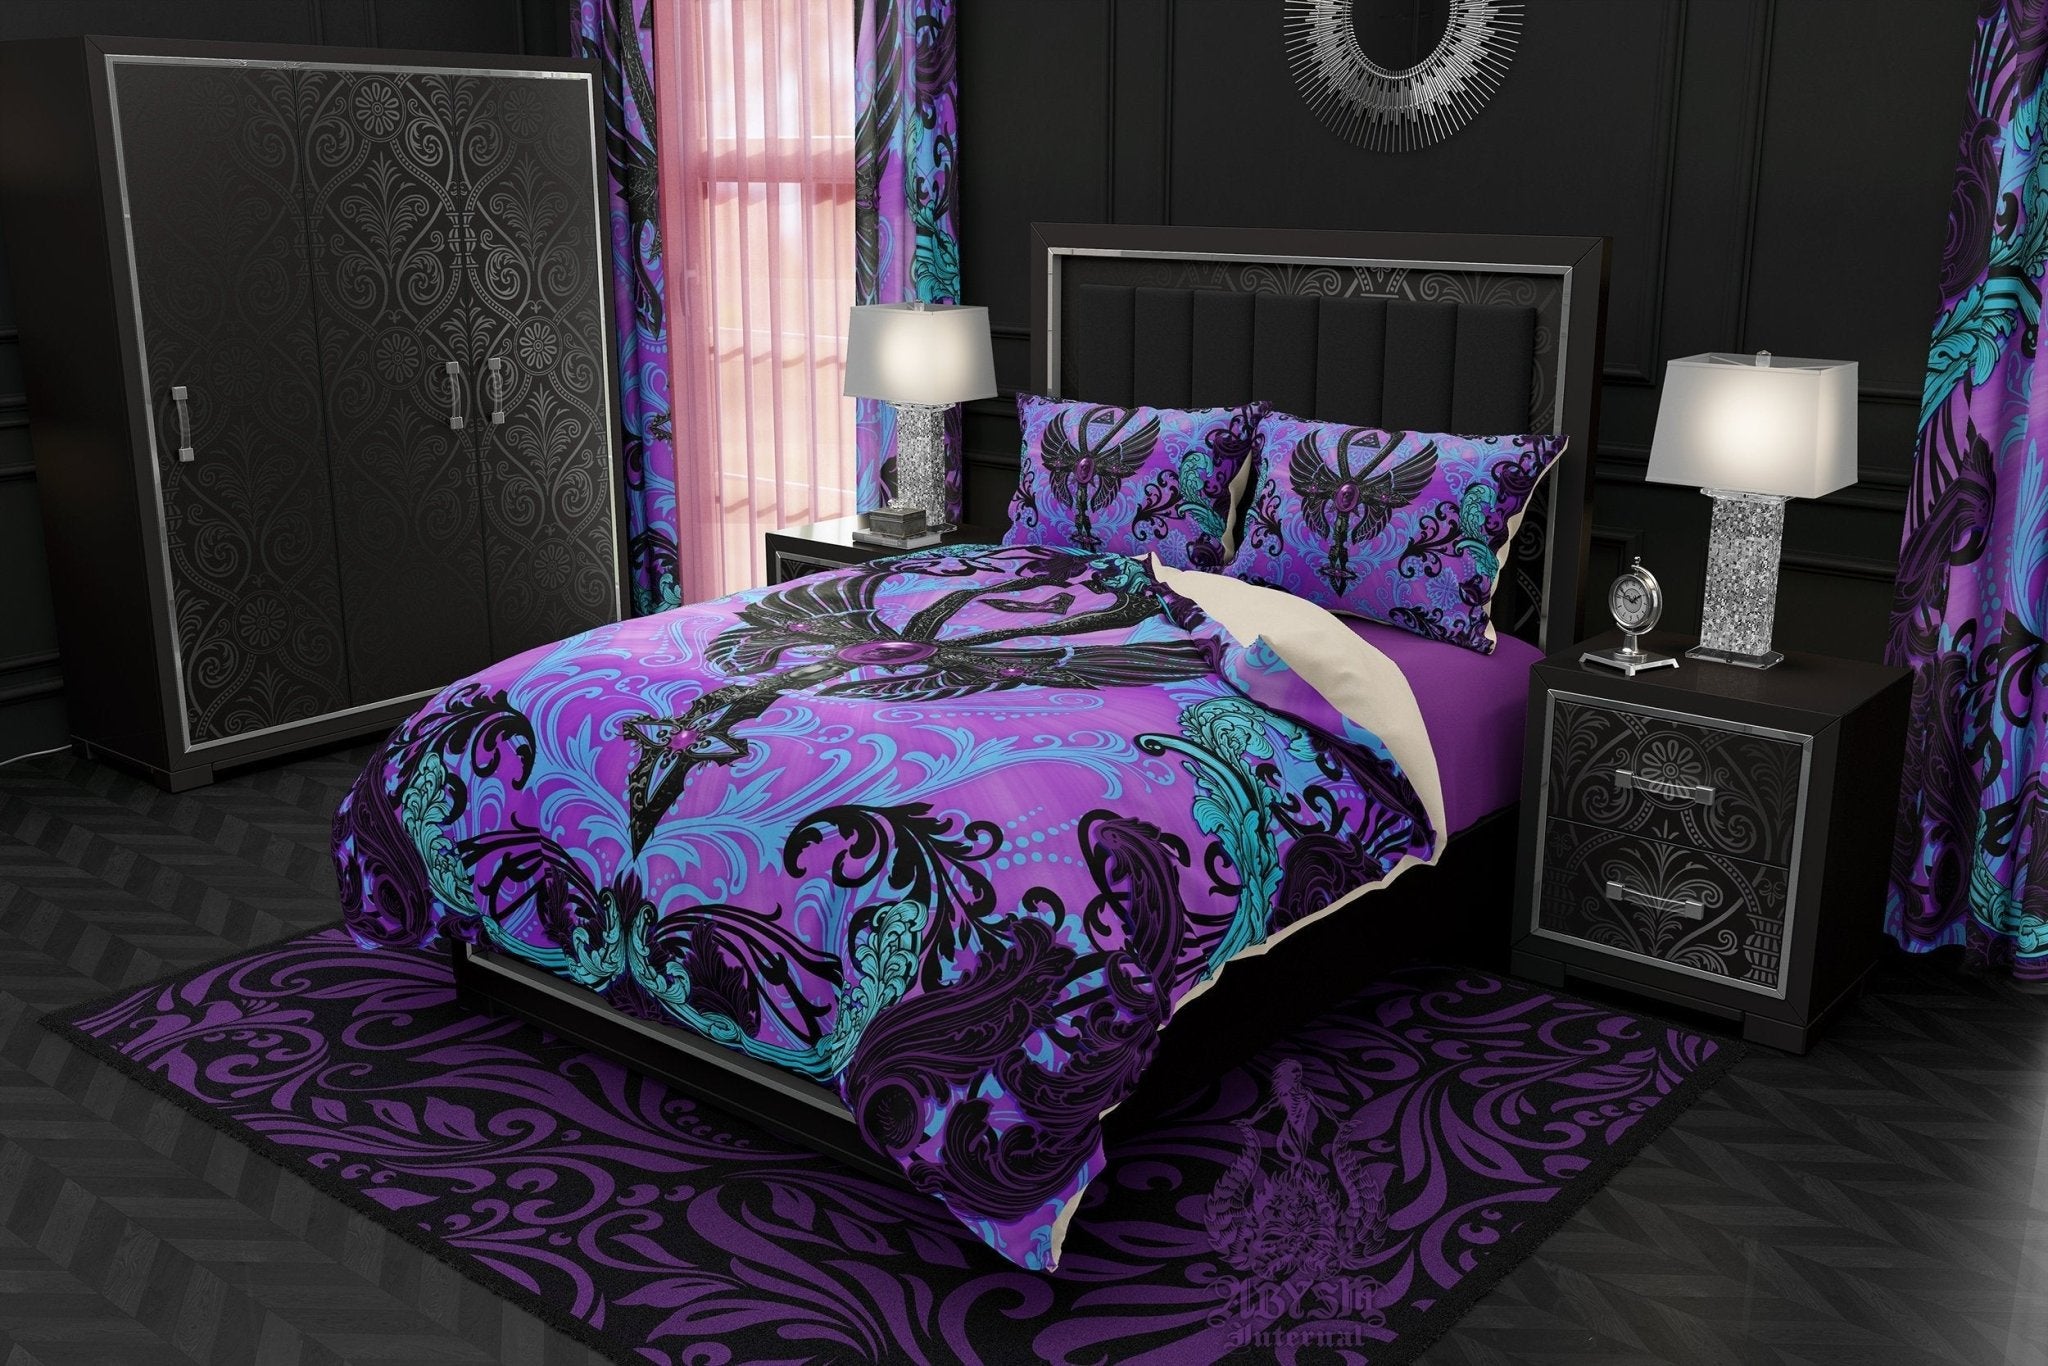 Pastel Goth Bedding Set, Comforter and Duvet, Ankh Cross, Gothic Bed Cover and Bedroom Decor, King, Queen and Twin Size - Black and Purple - Abysm Internal